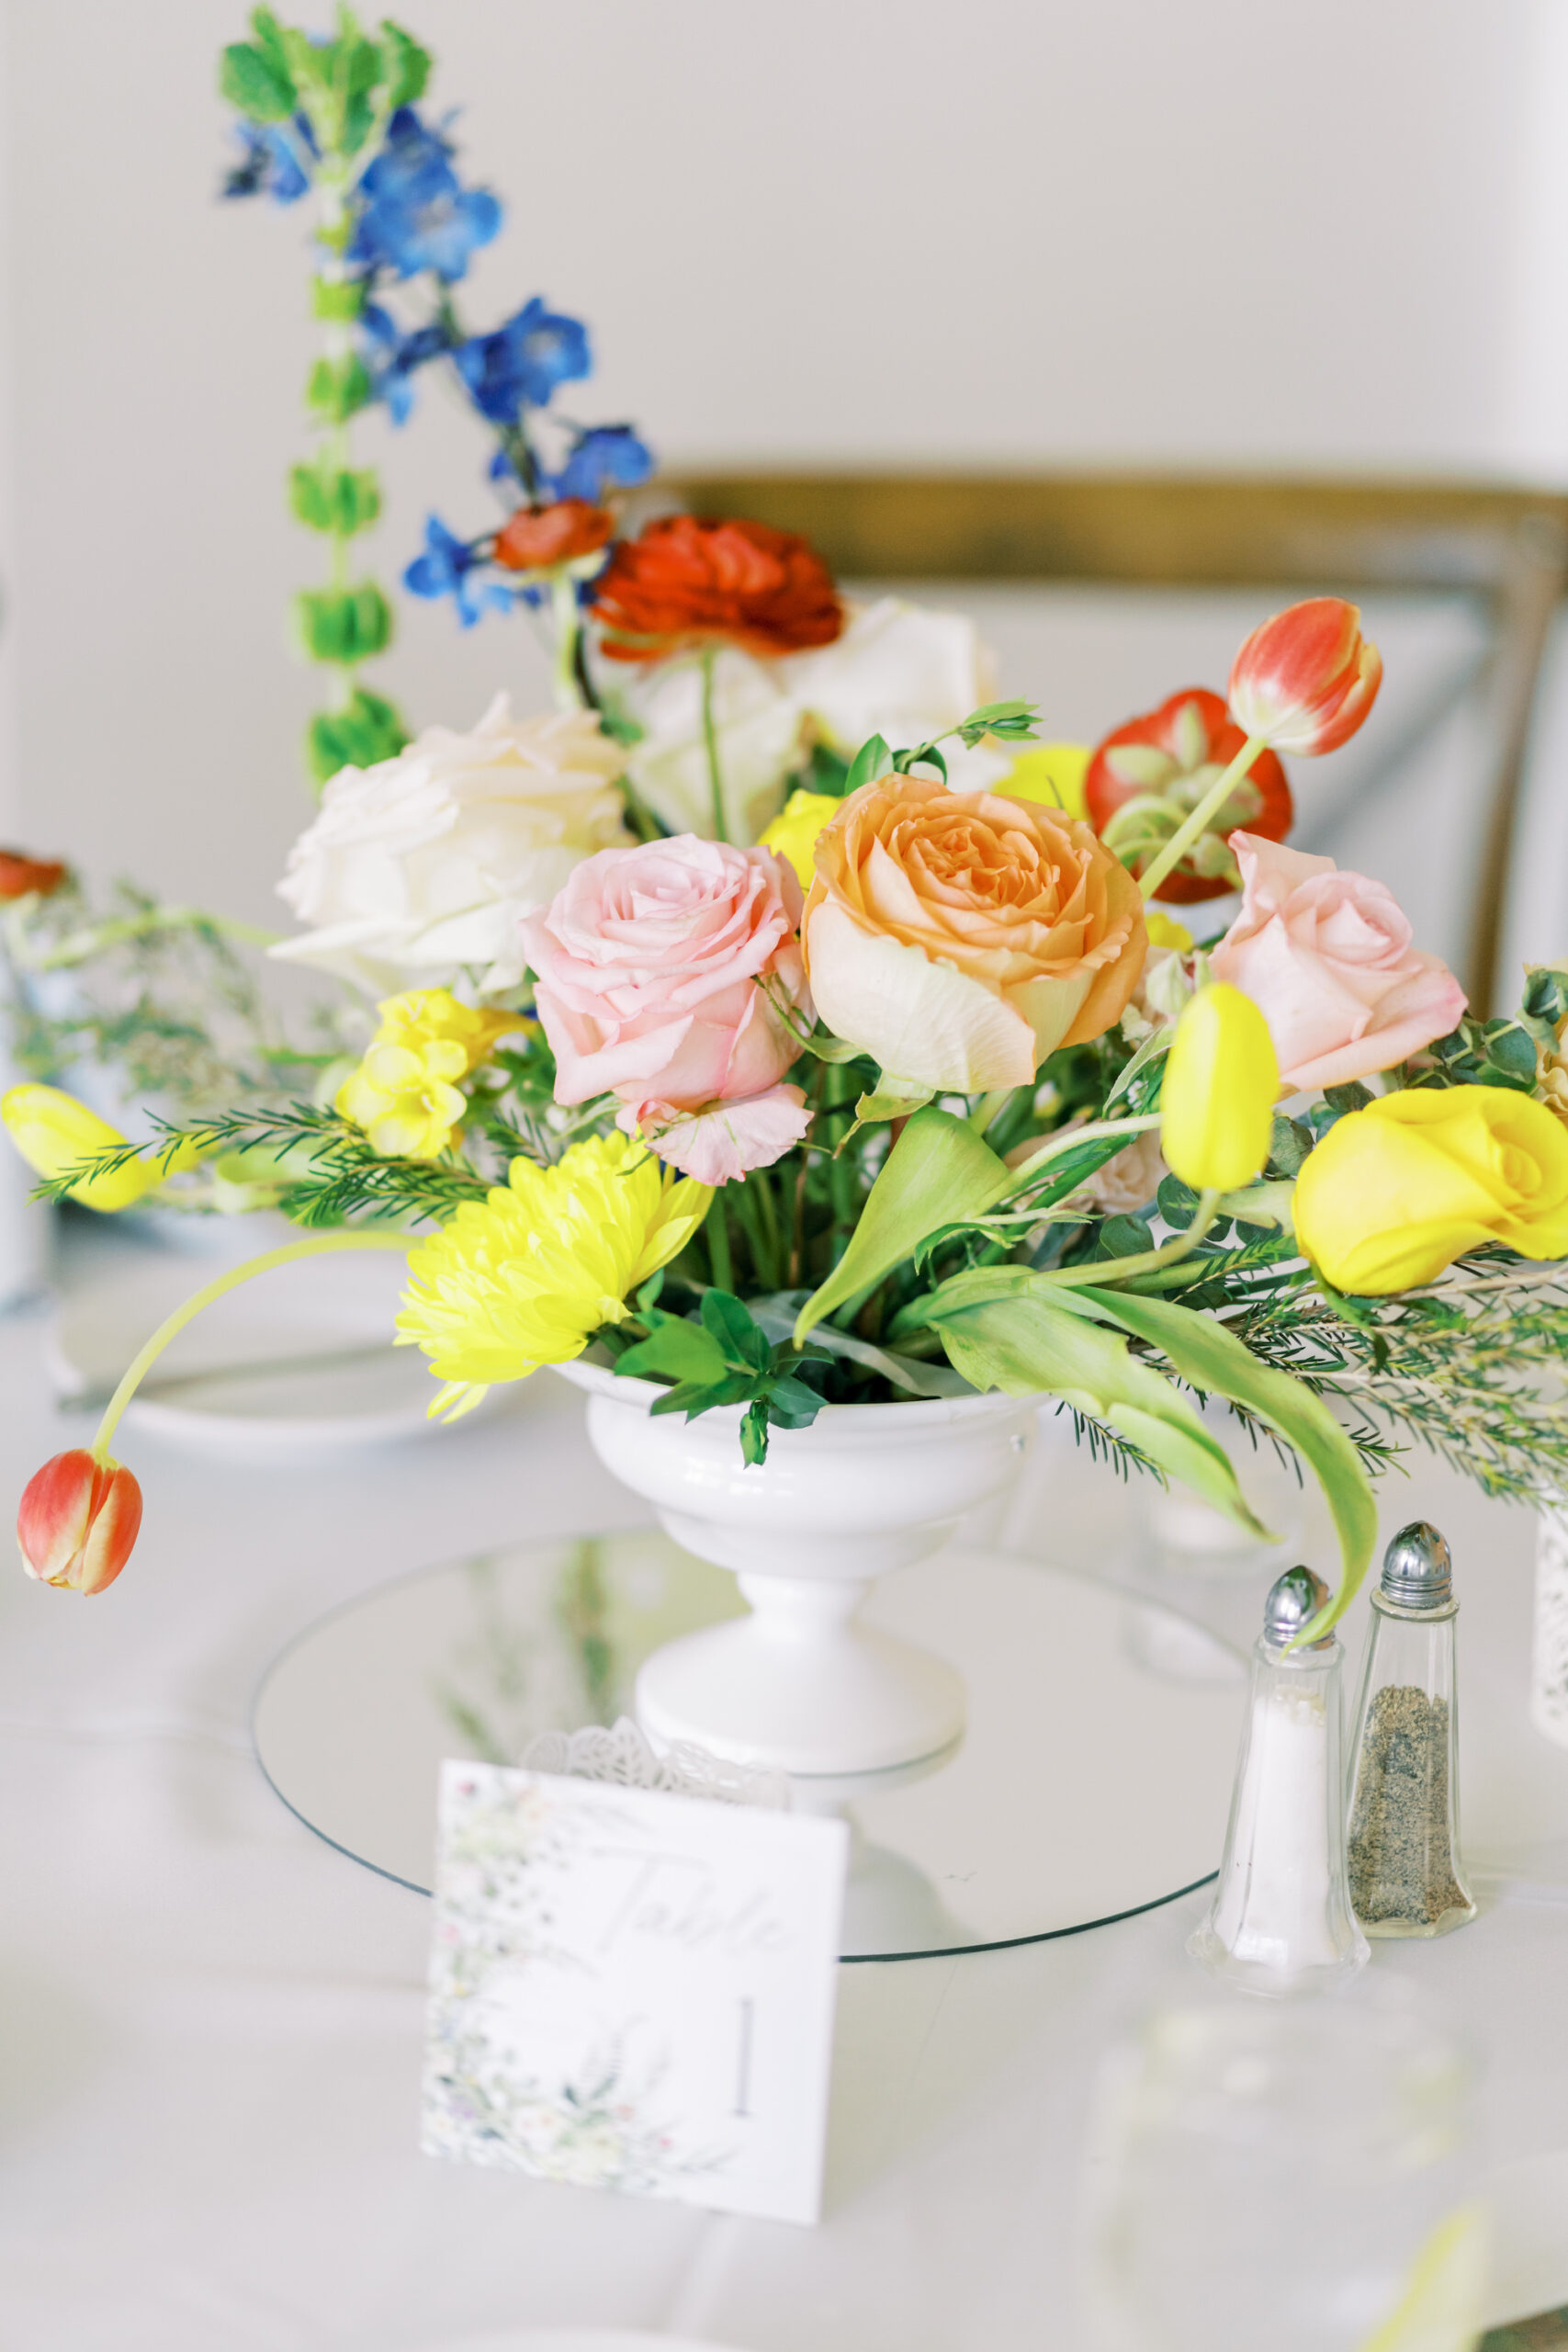 Orange, Yellow, and Pink Roses, Tulips, Blue Snapdragons | Spring Wedding Centerpiece Decor Ideas